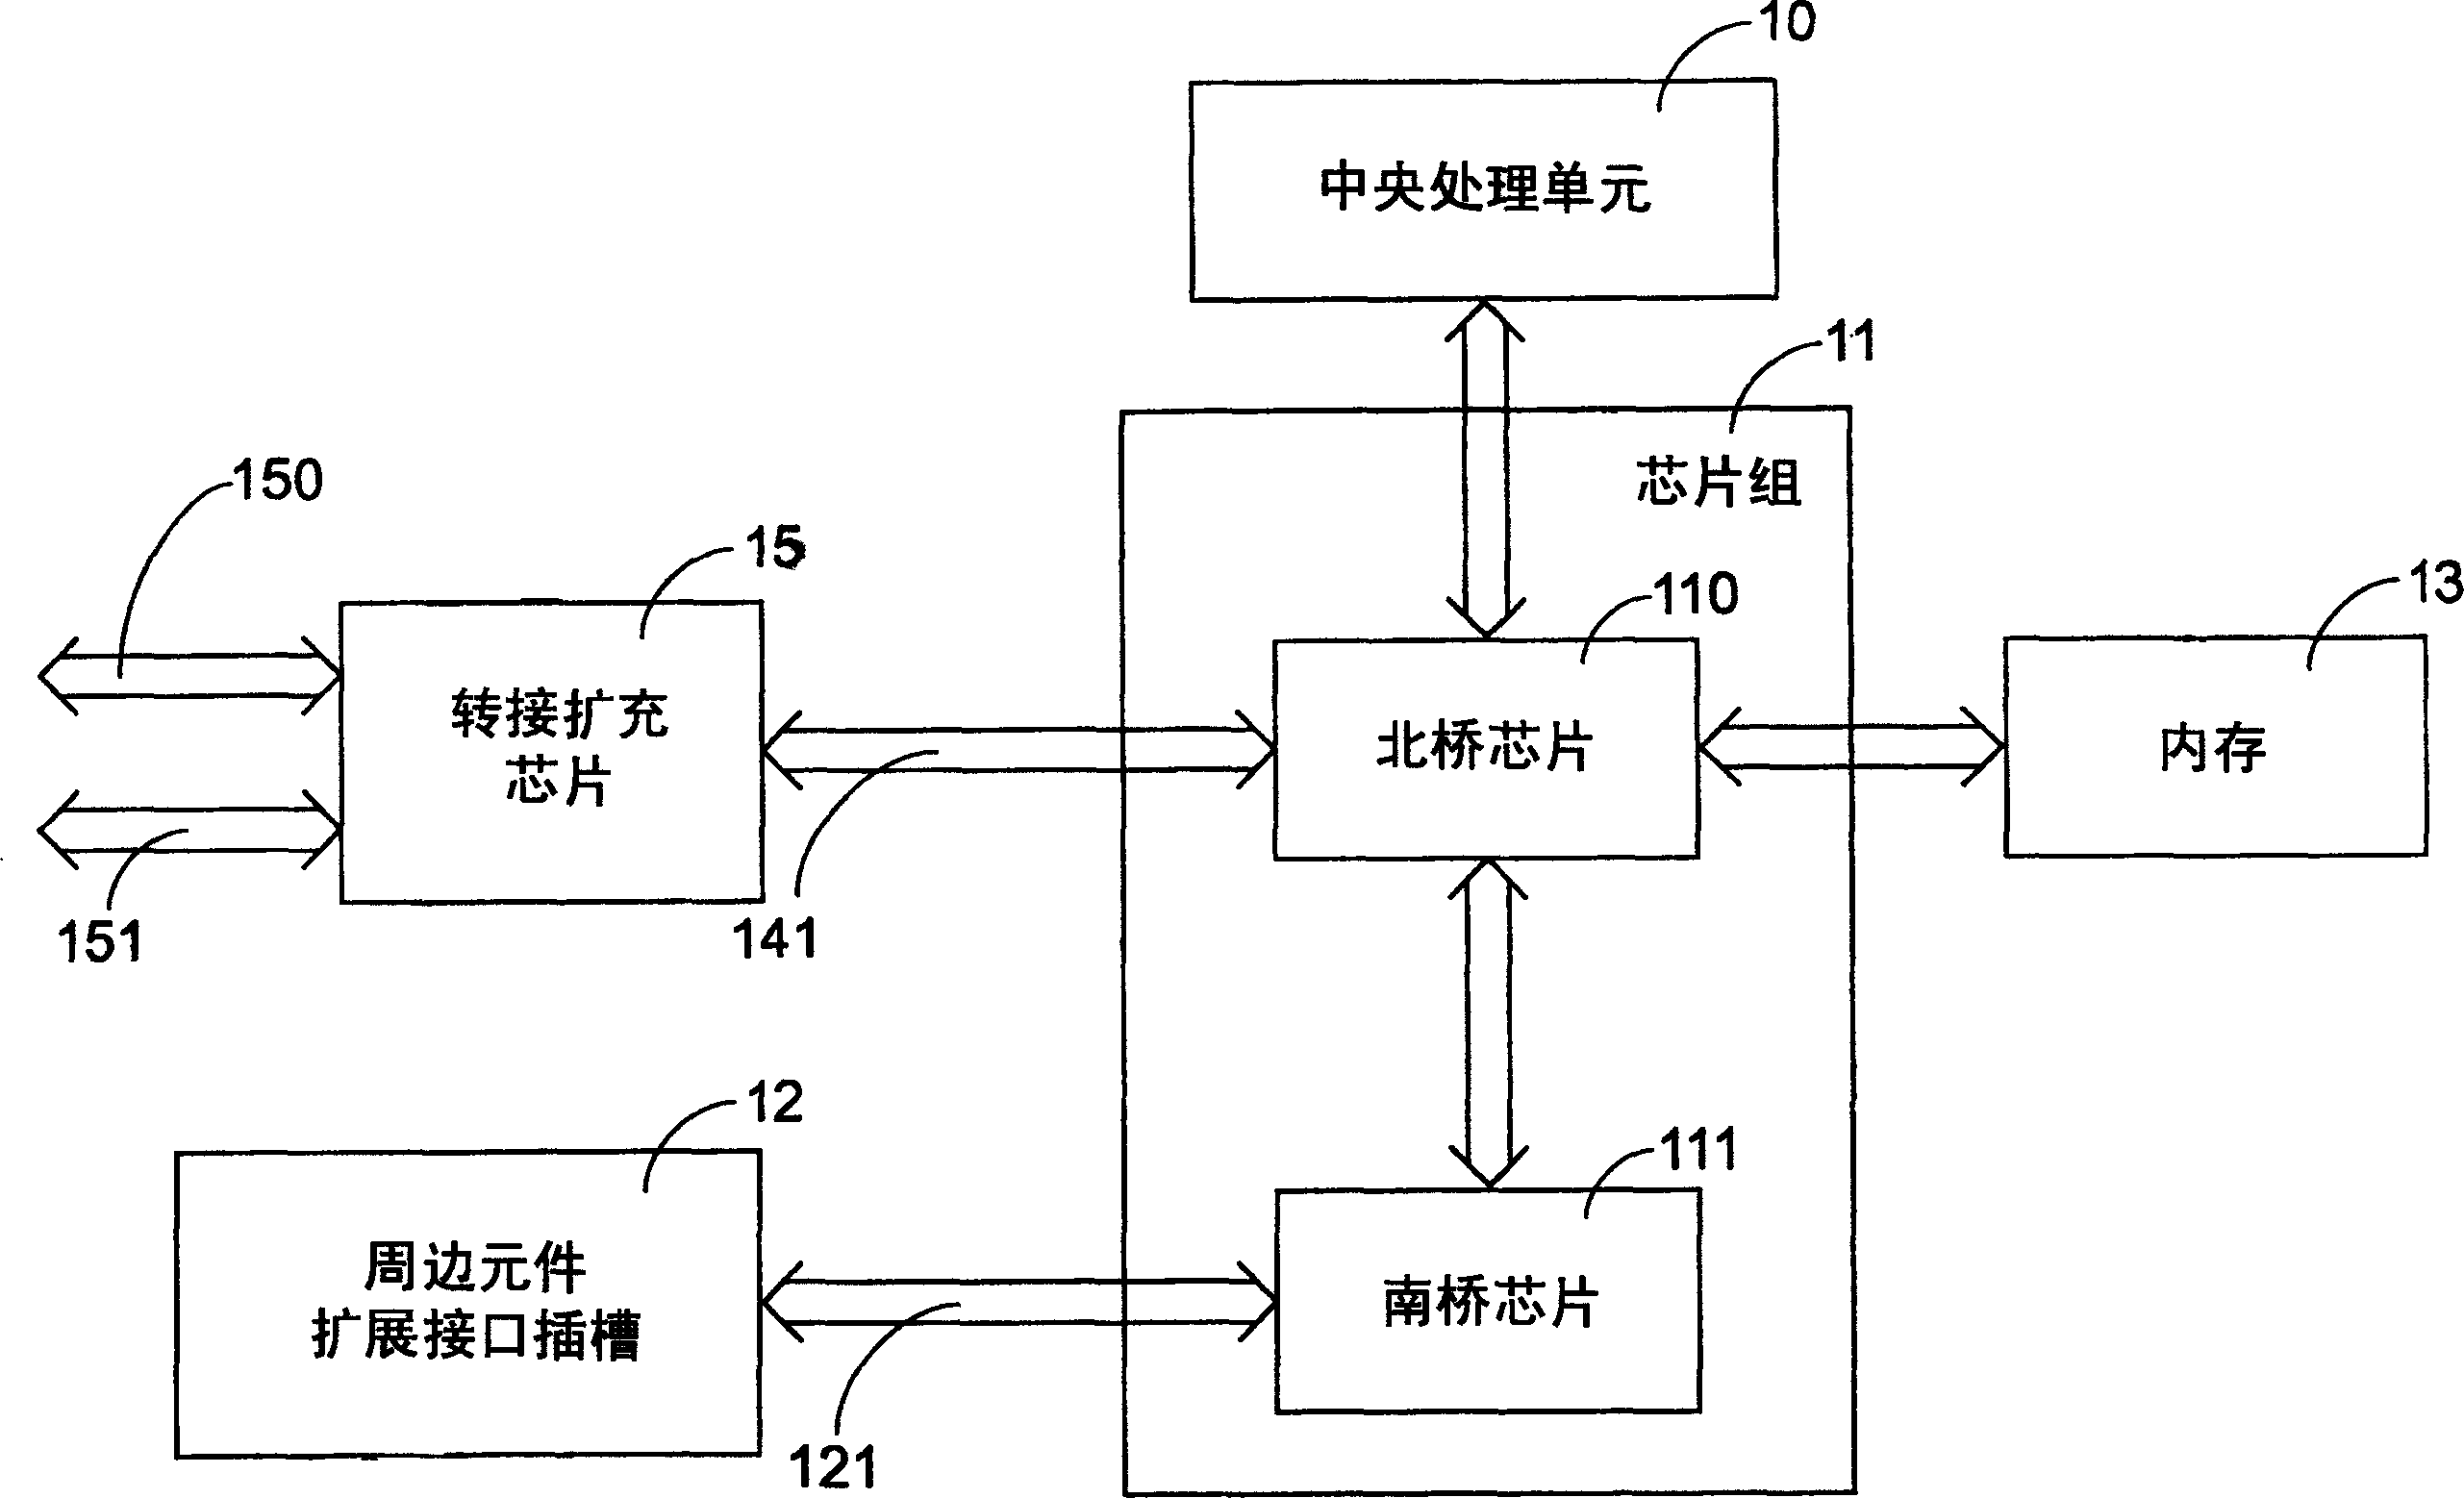 Switching extension equipment for computer system